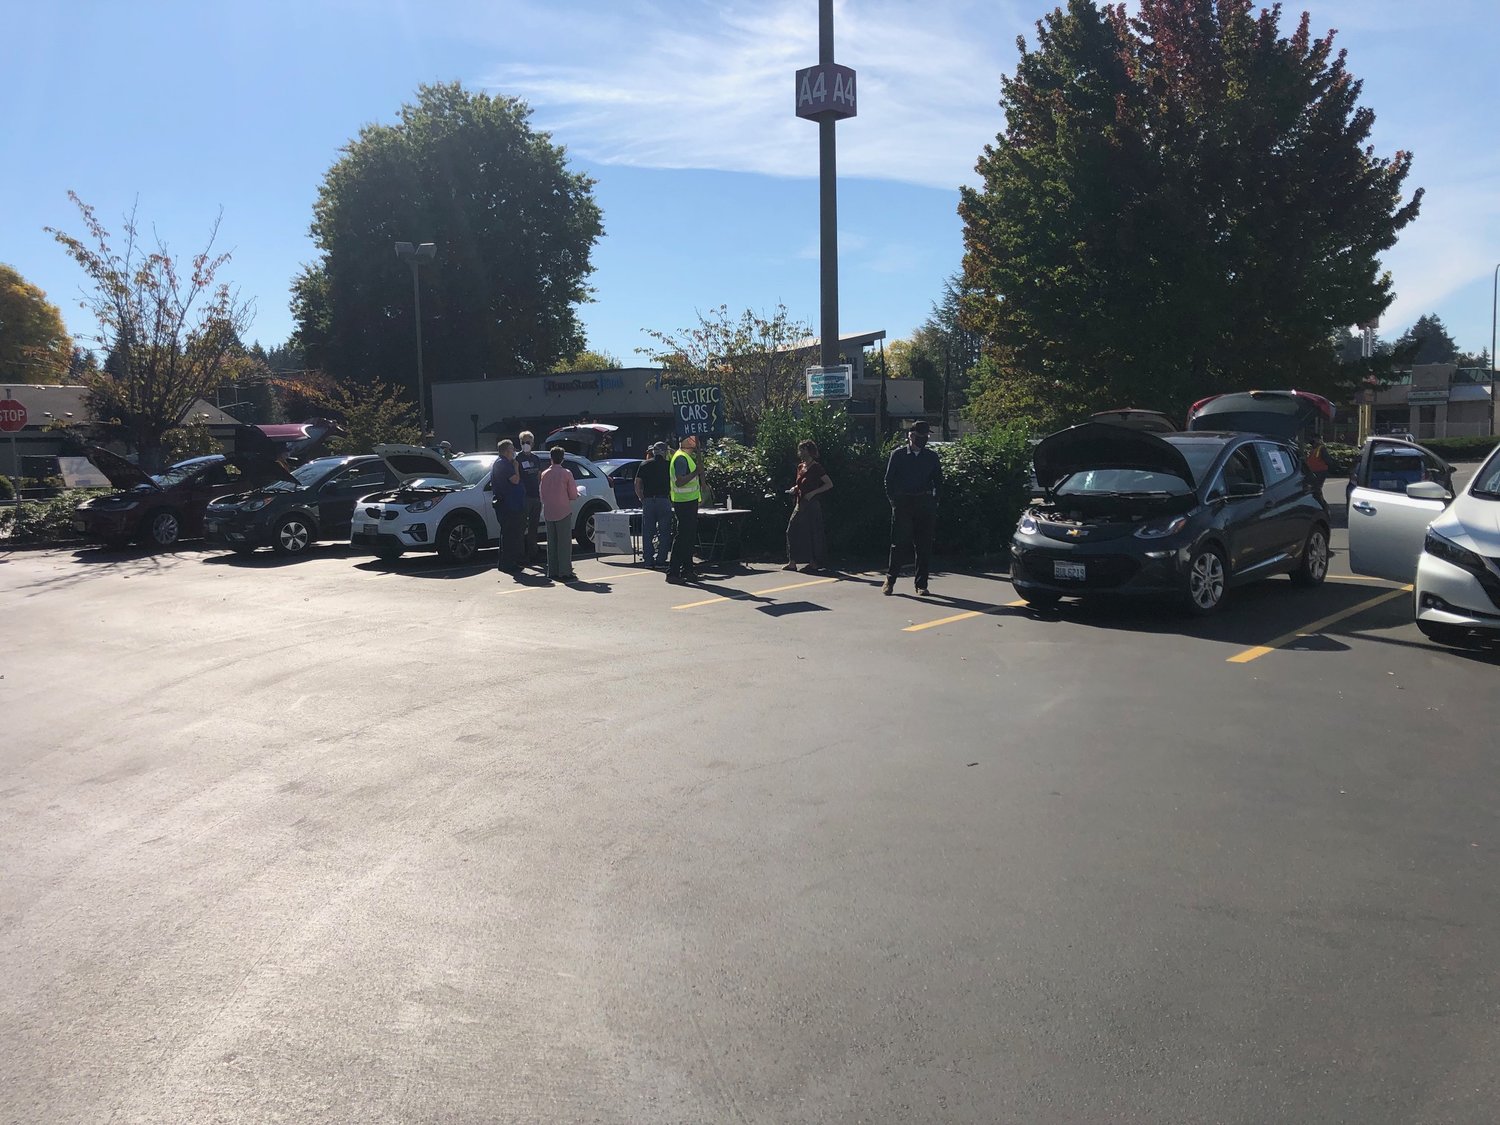 More than a dozen diehard electric vehicle proponents showed up for Thurston Climate Action Team's flash mob gathering on Sat., Sept. 25, 2021.